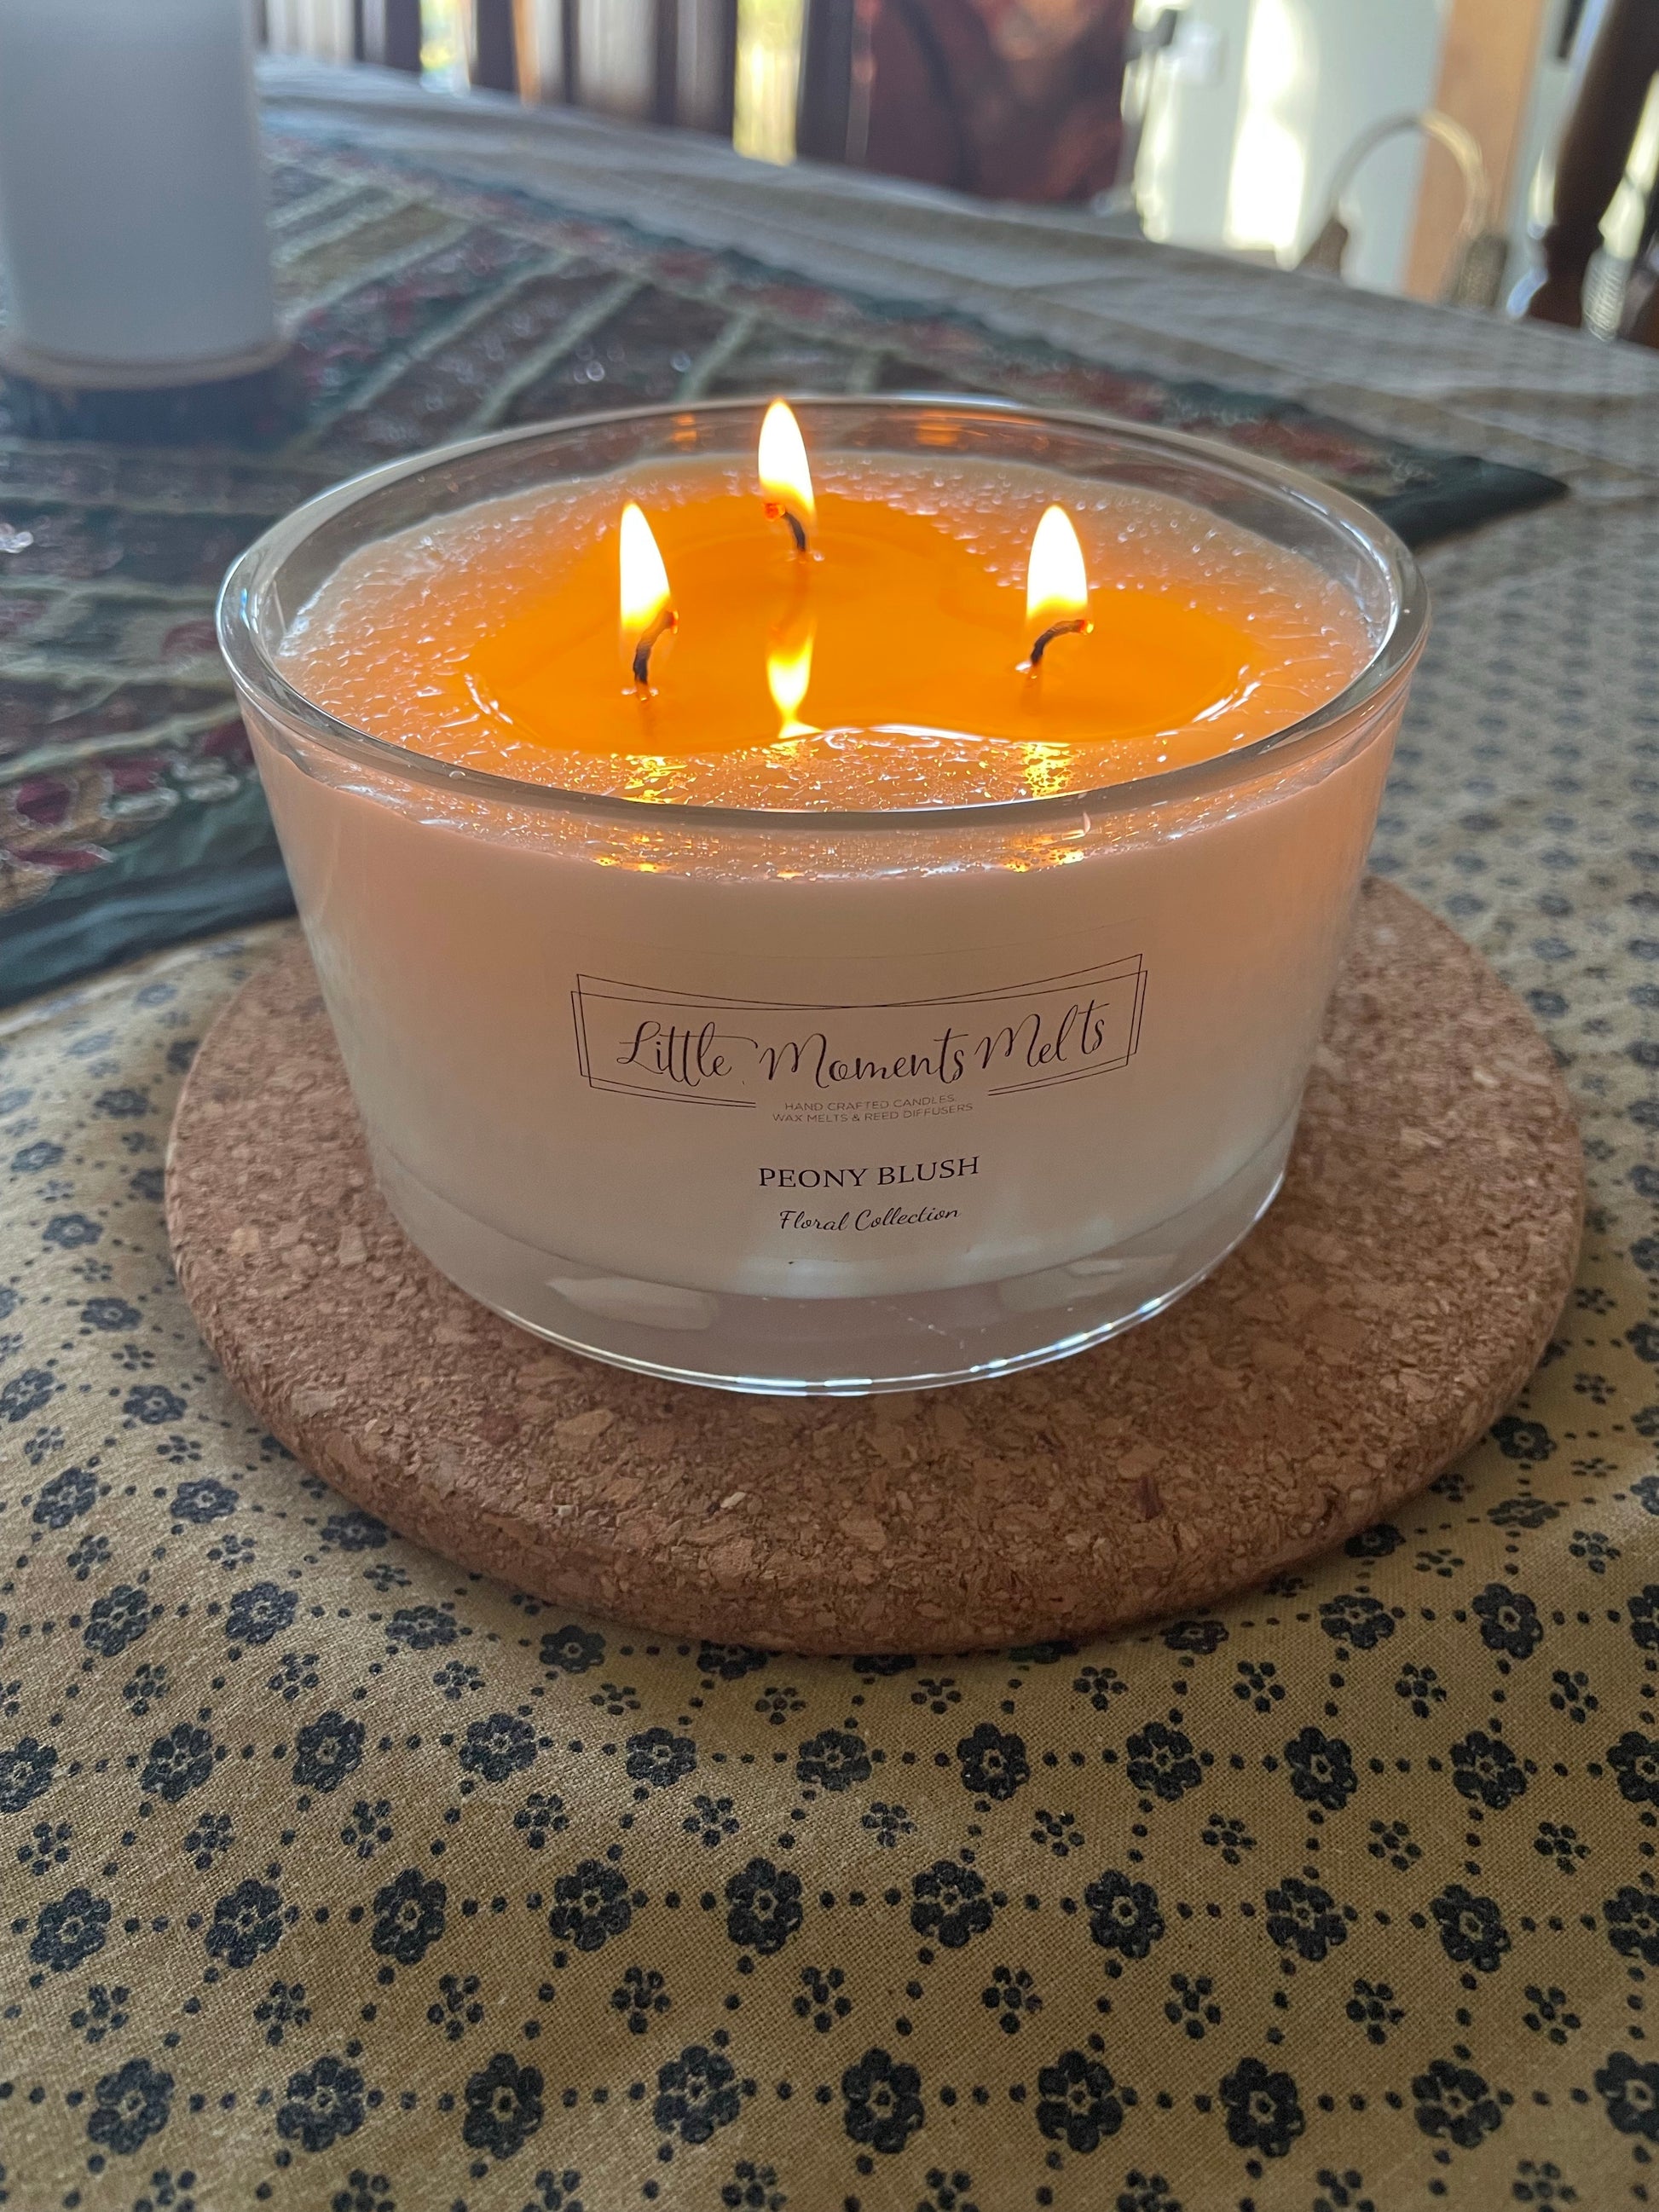 Hand poured 3 wick candle from Little Moments Melts